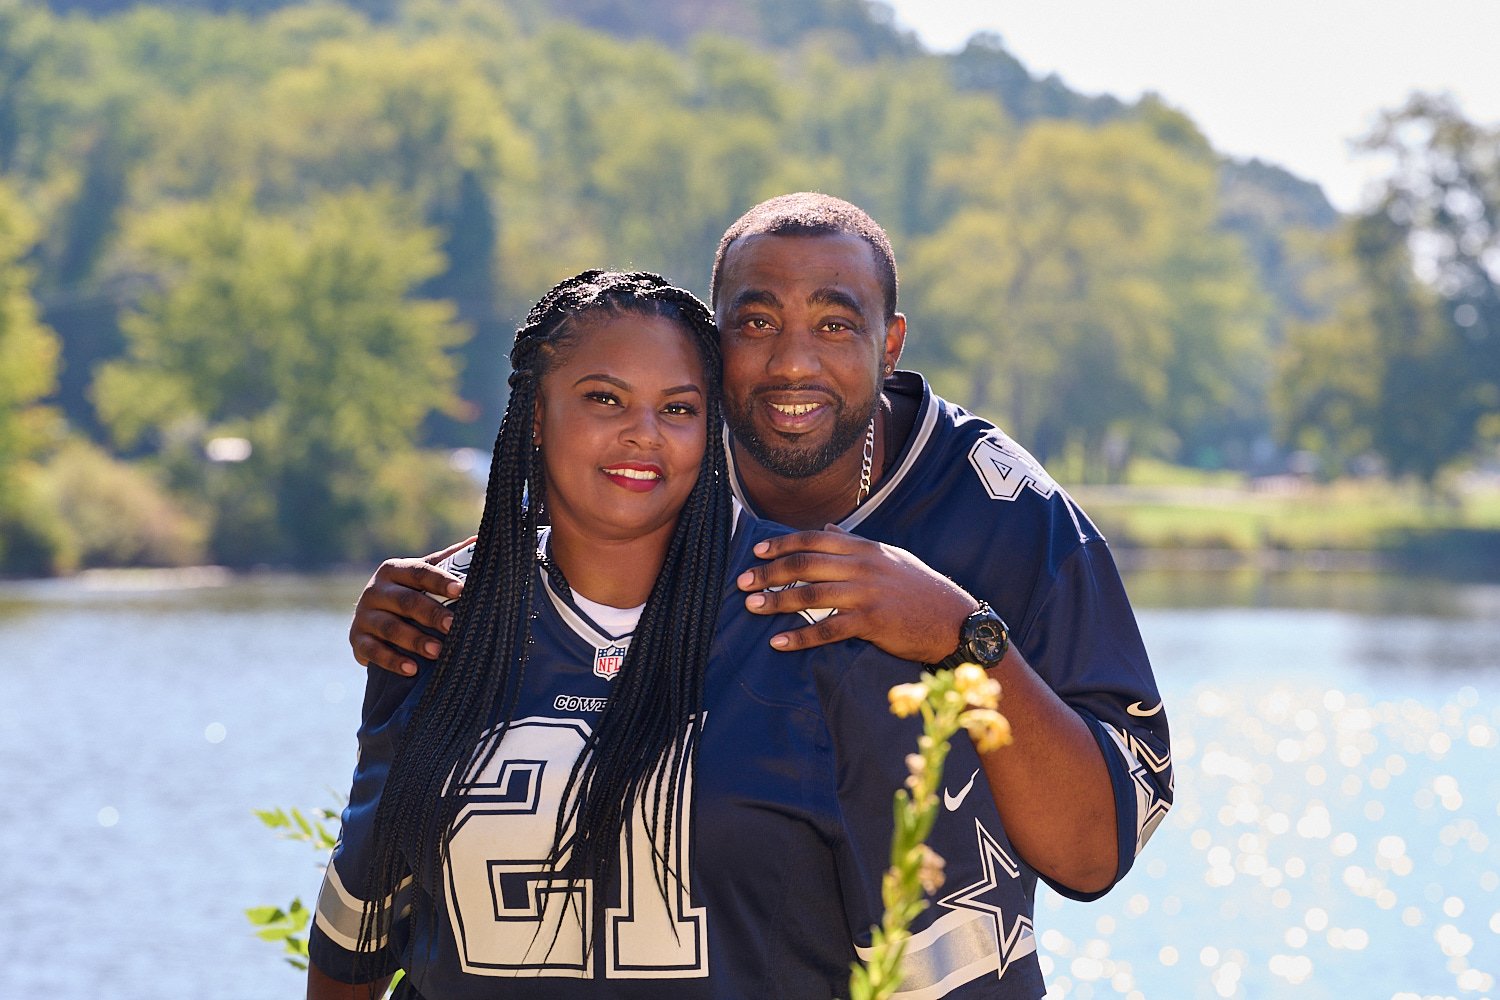  Patrice Carter is posing with her fiance for fun and intimate photos on Marshall Island in North Park near Pittsburgh, PA. It’s a sunny day on the lake shore and the couple looks happy and in love. 